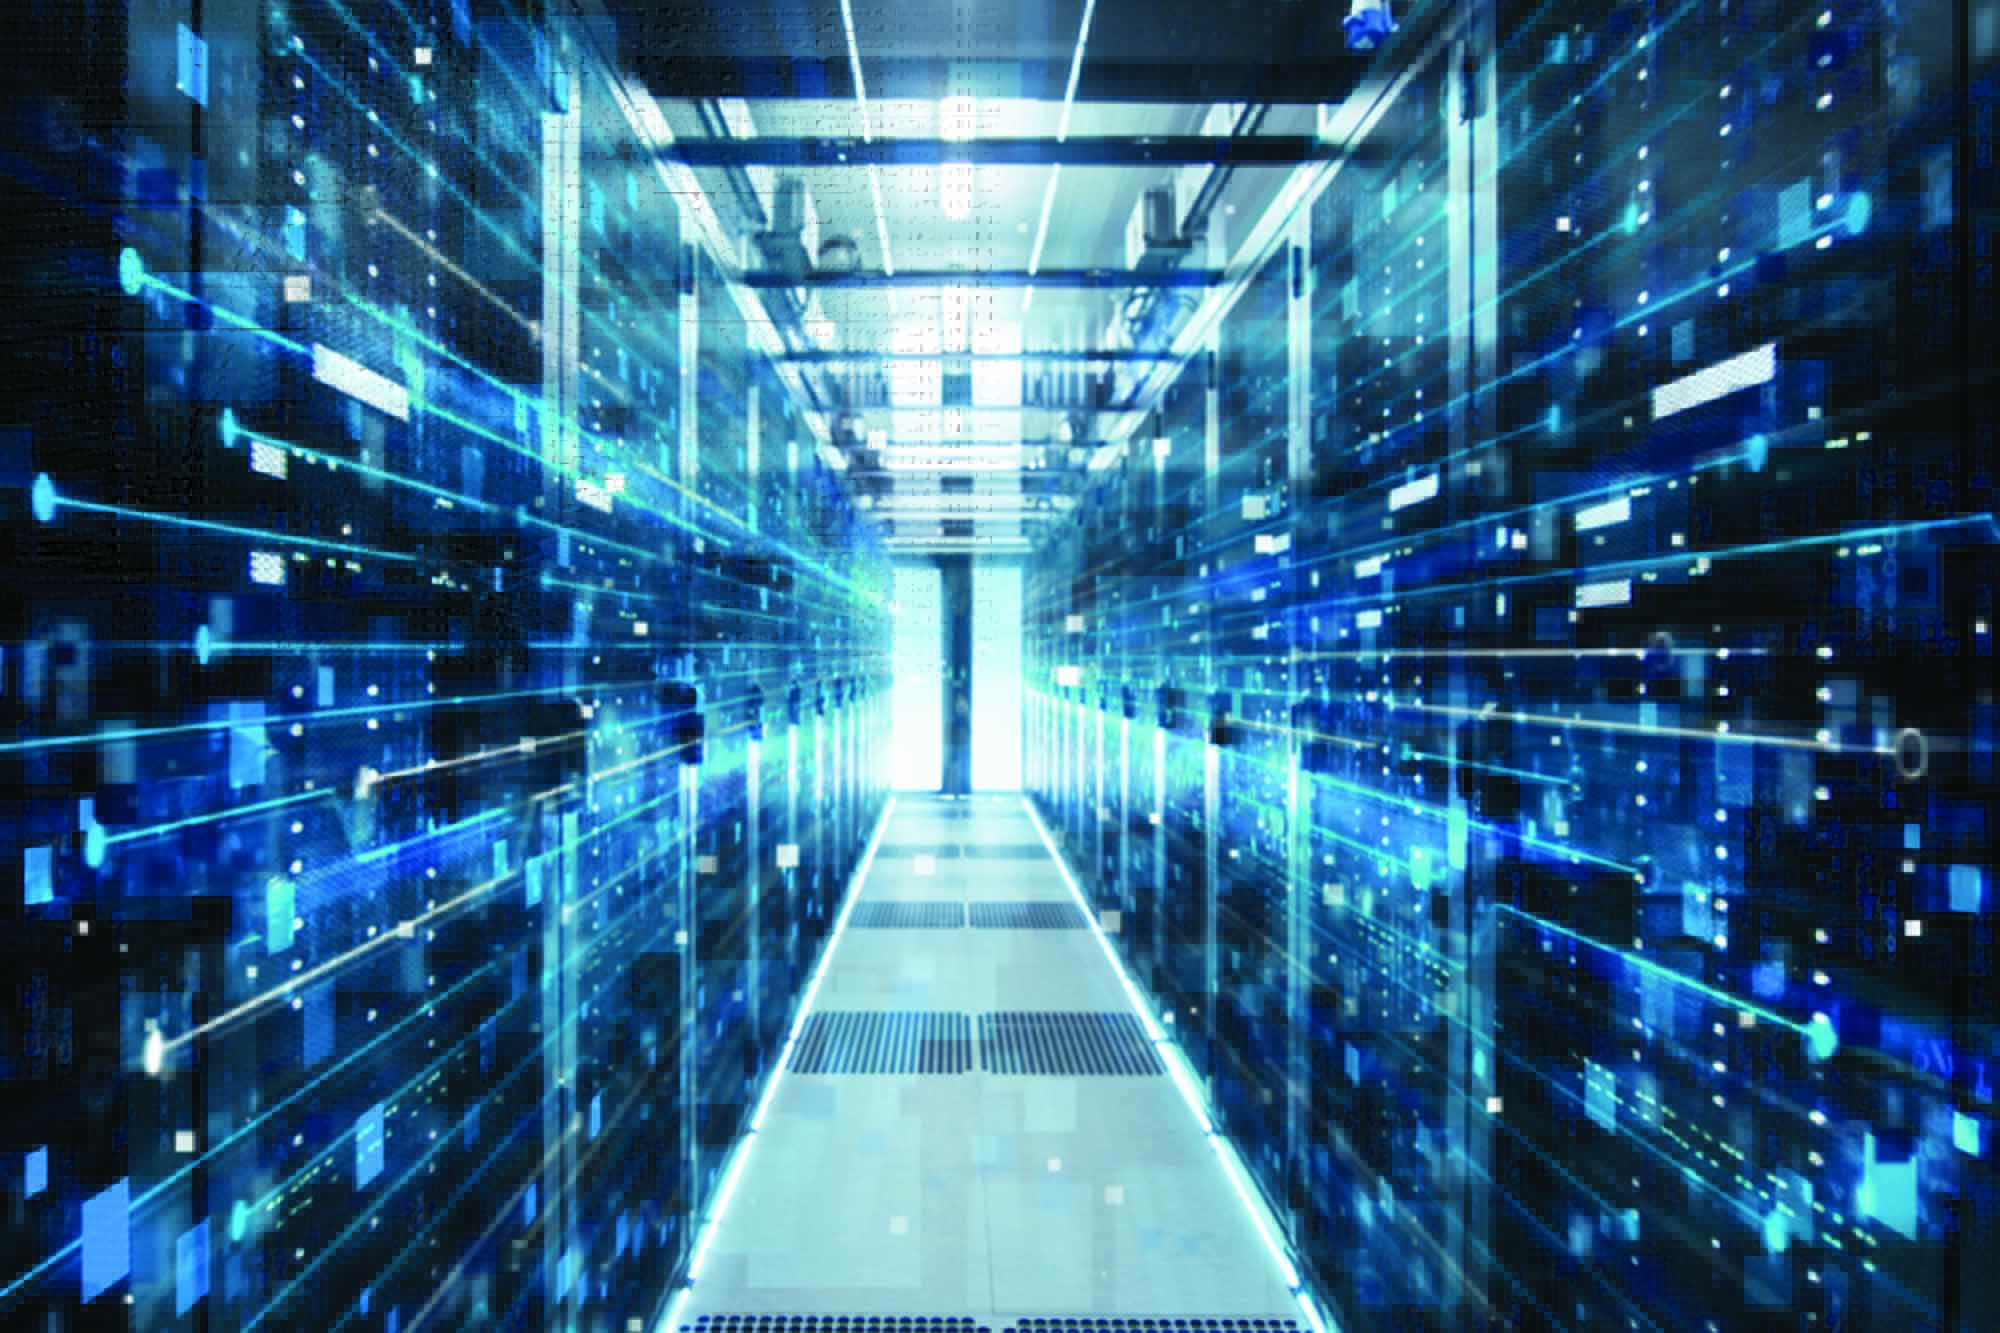 India’s data center boom reshapes APAC investment landscape